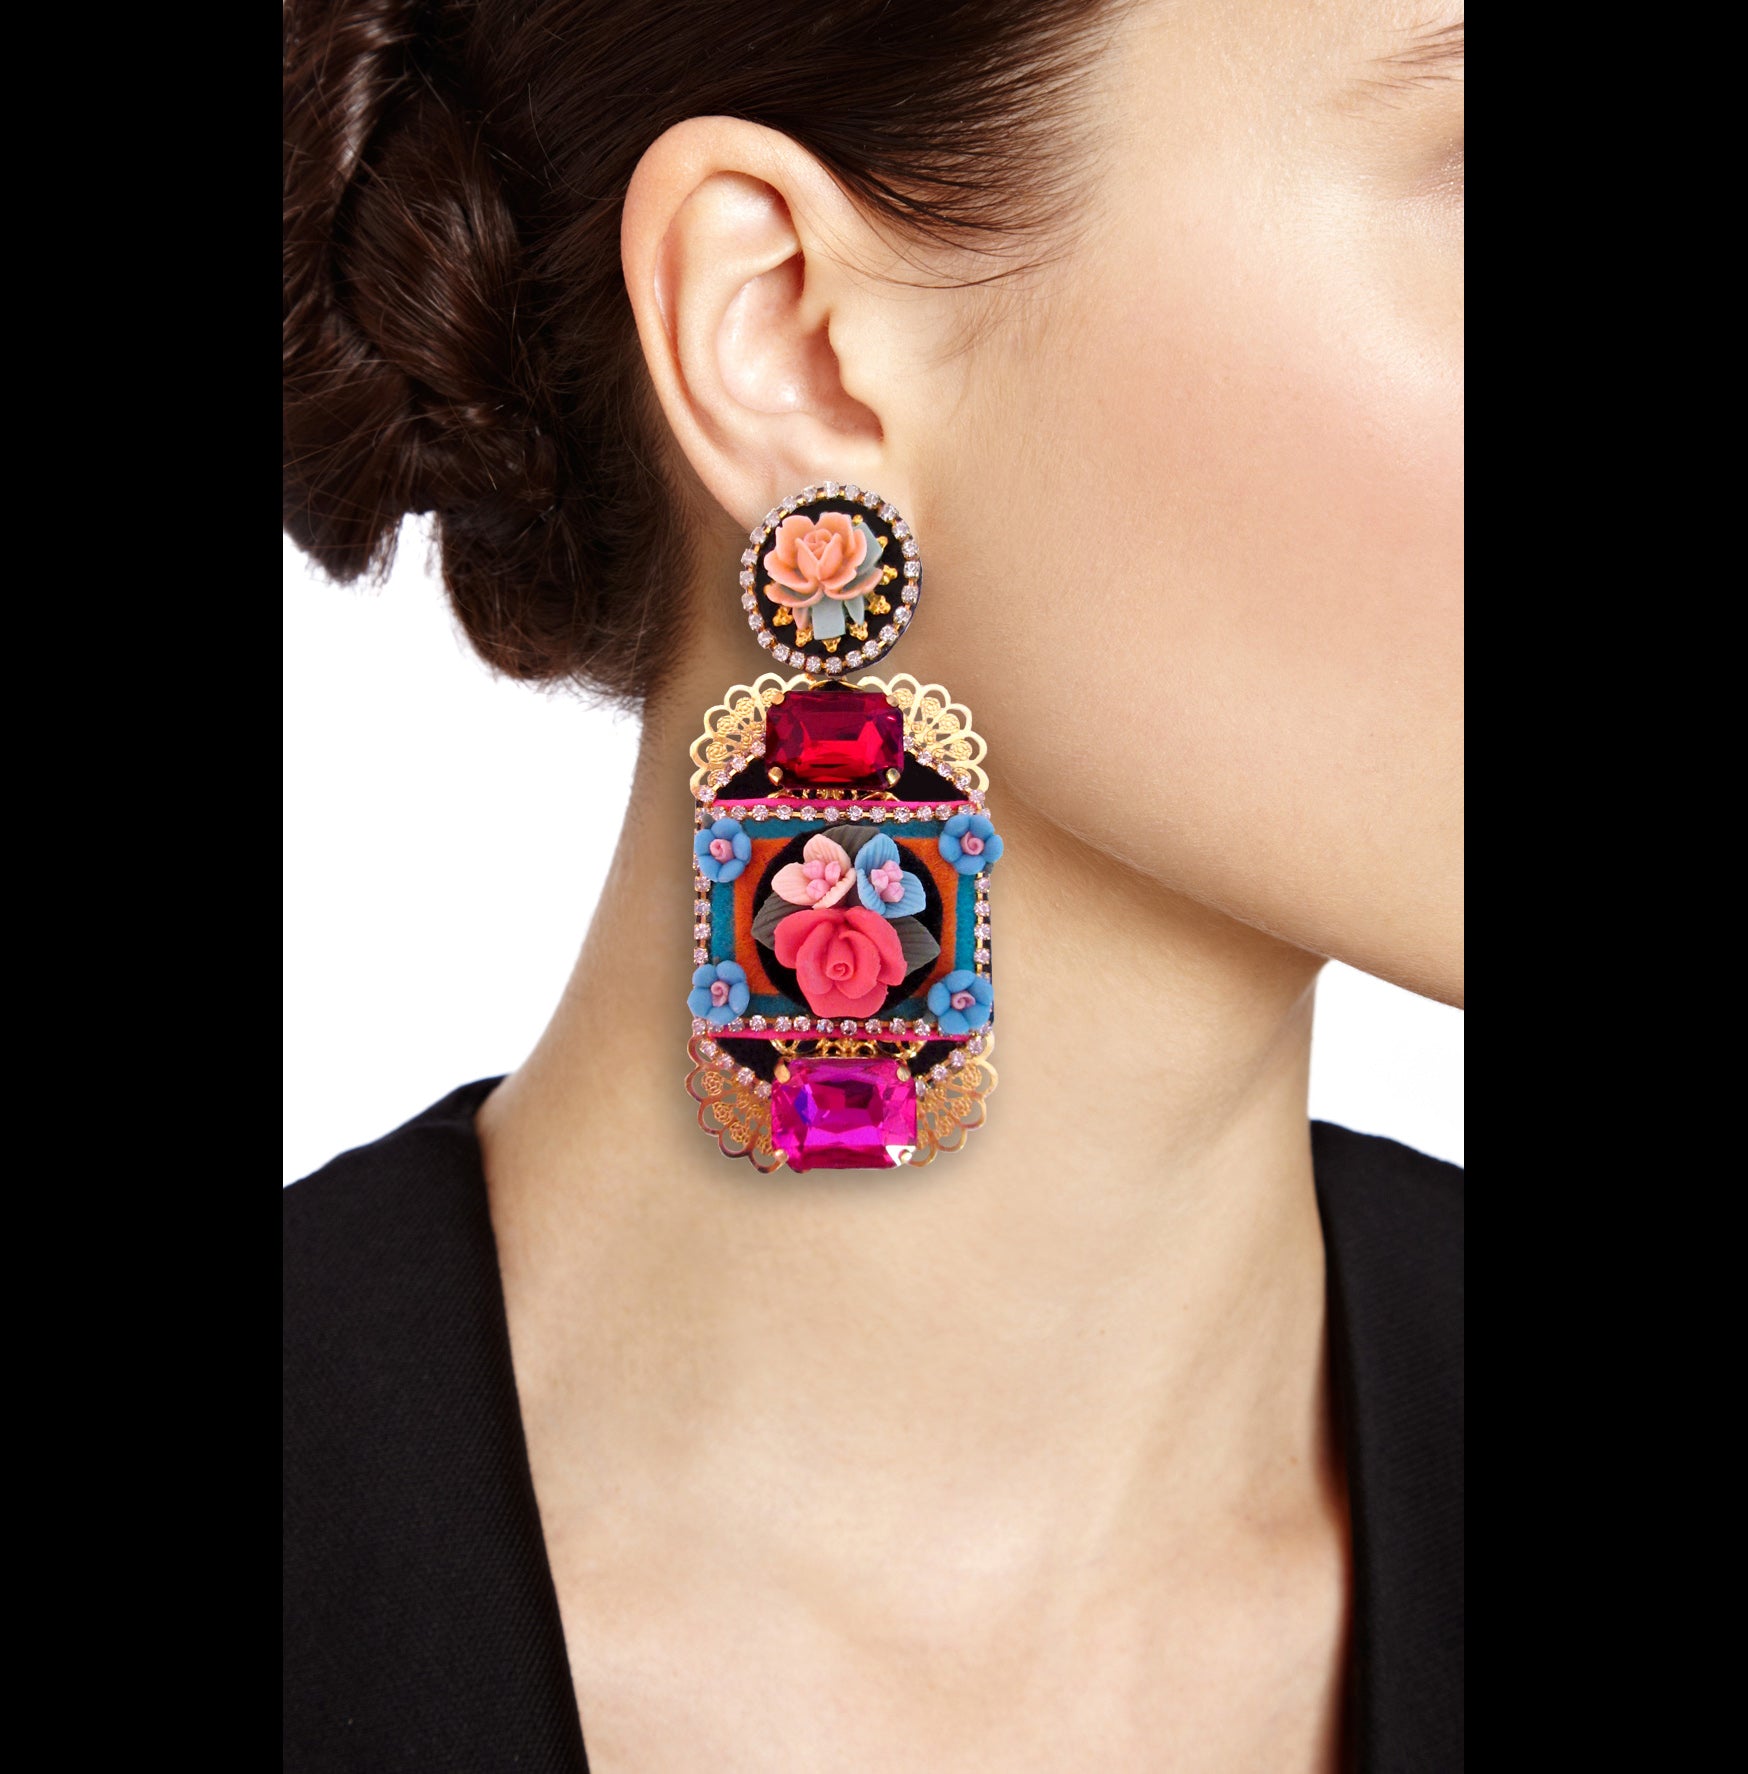 Mouchkine Jewelry handmade in france couture floral earrings.